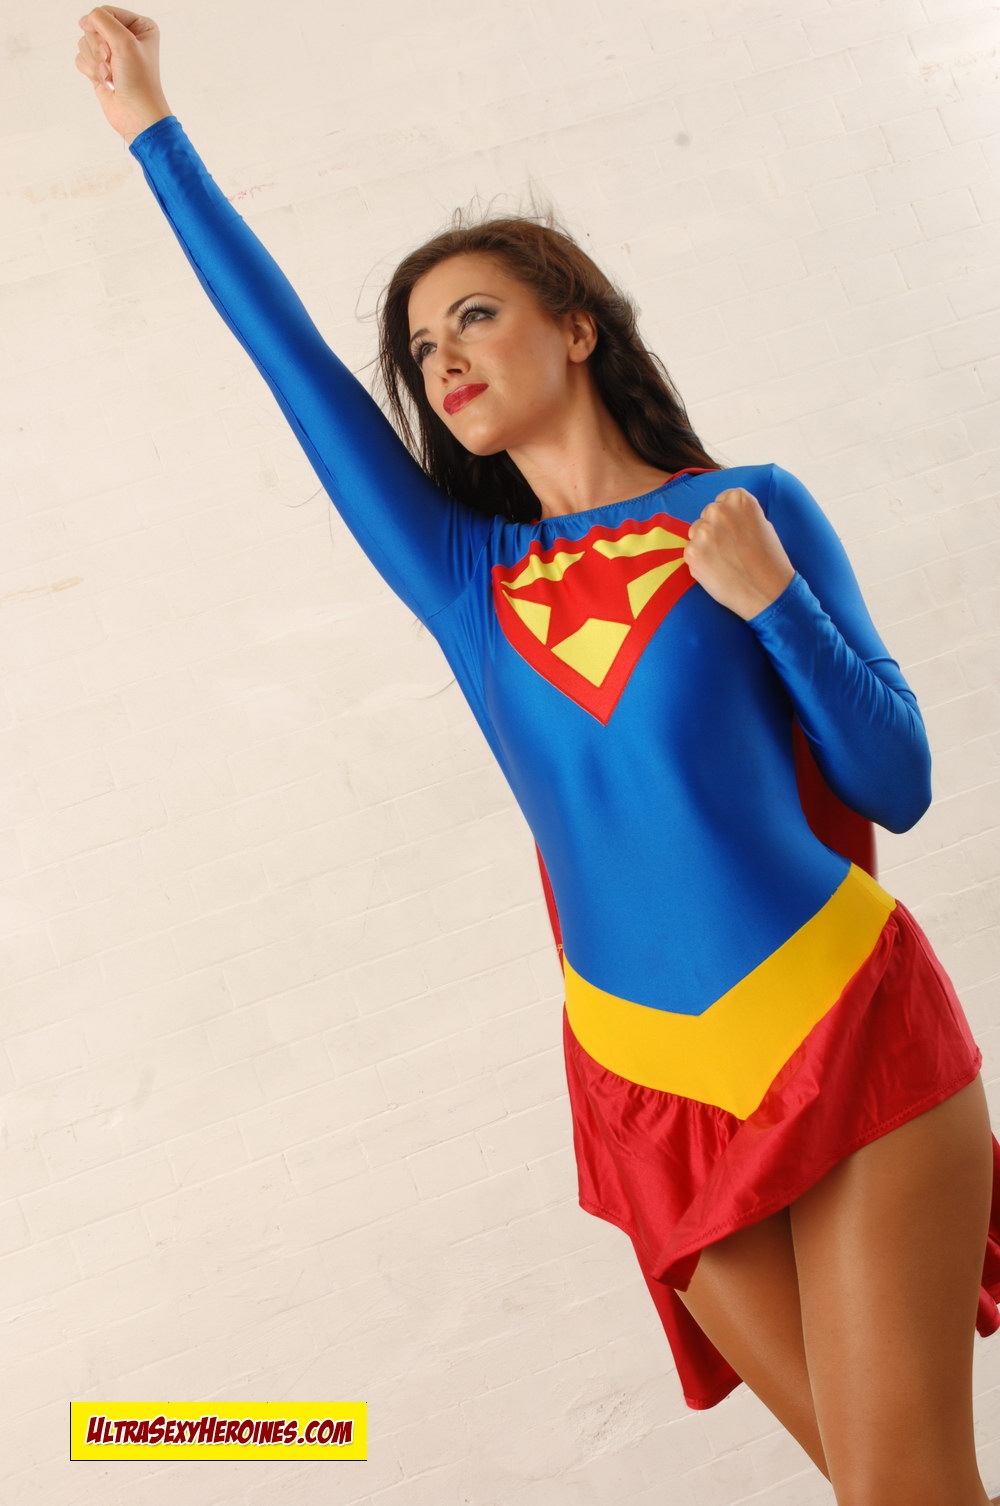 [UltraSexyHeroines] Super Heroine Cosplay Nude - Holly 65